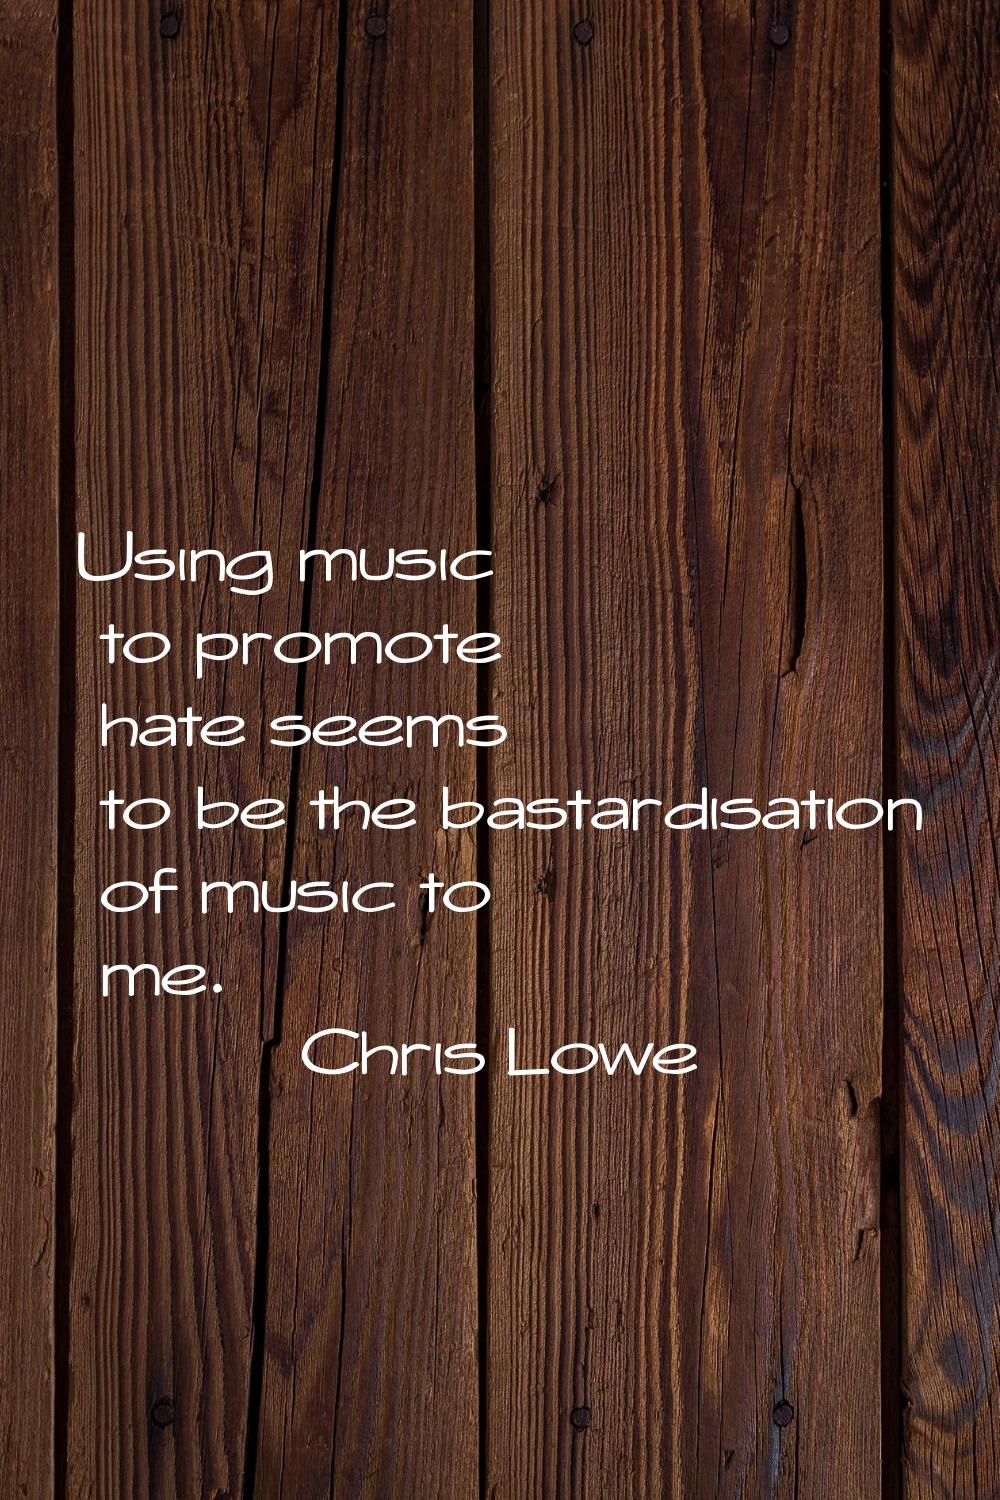 Using music to promote hate seems to be the bastardisation of music to me.